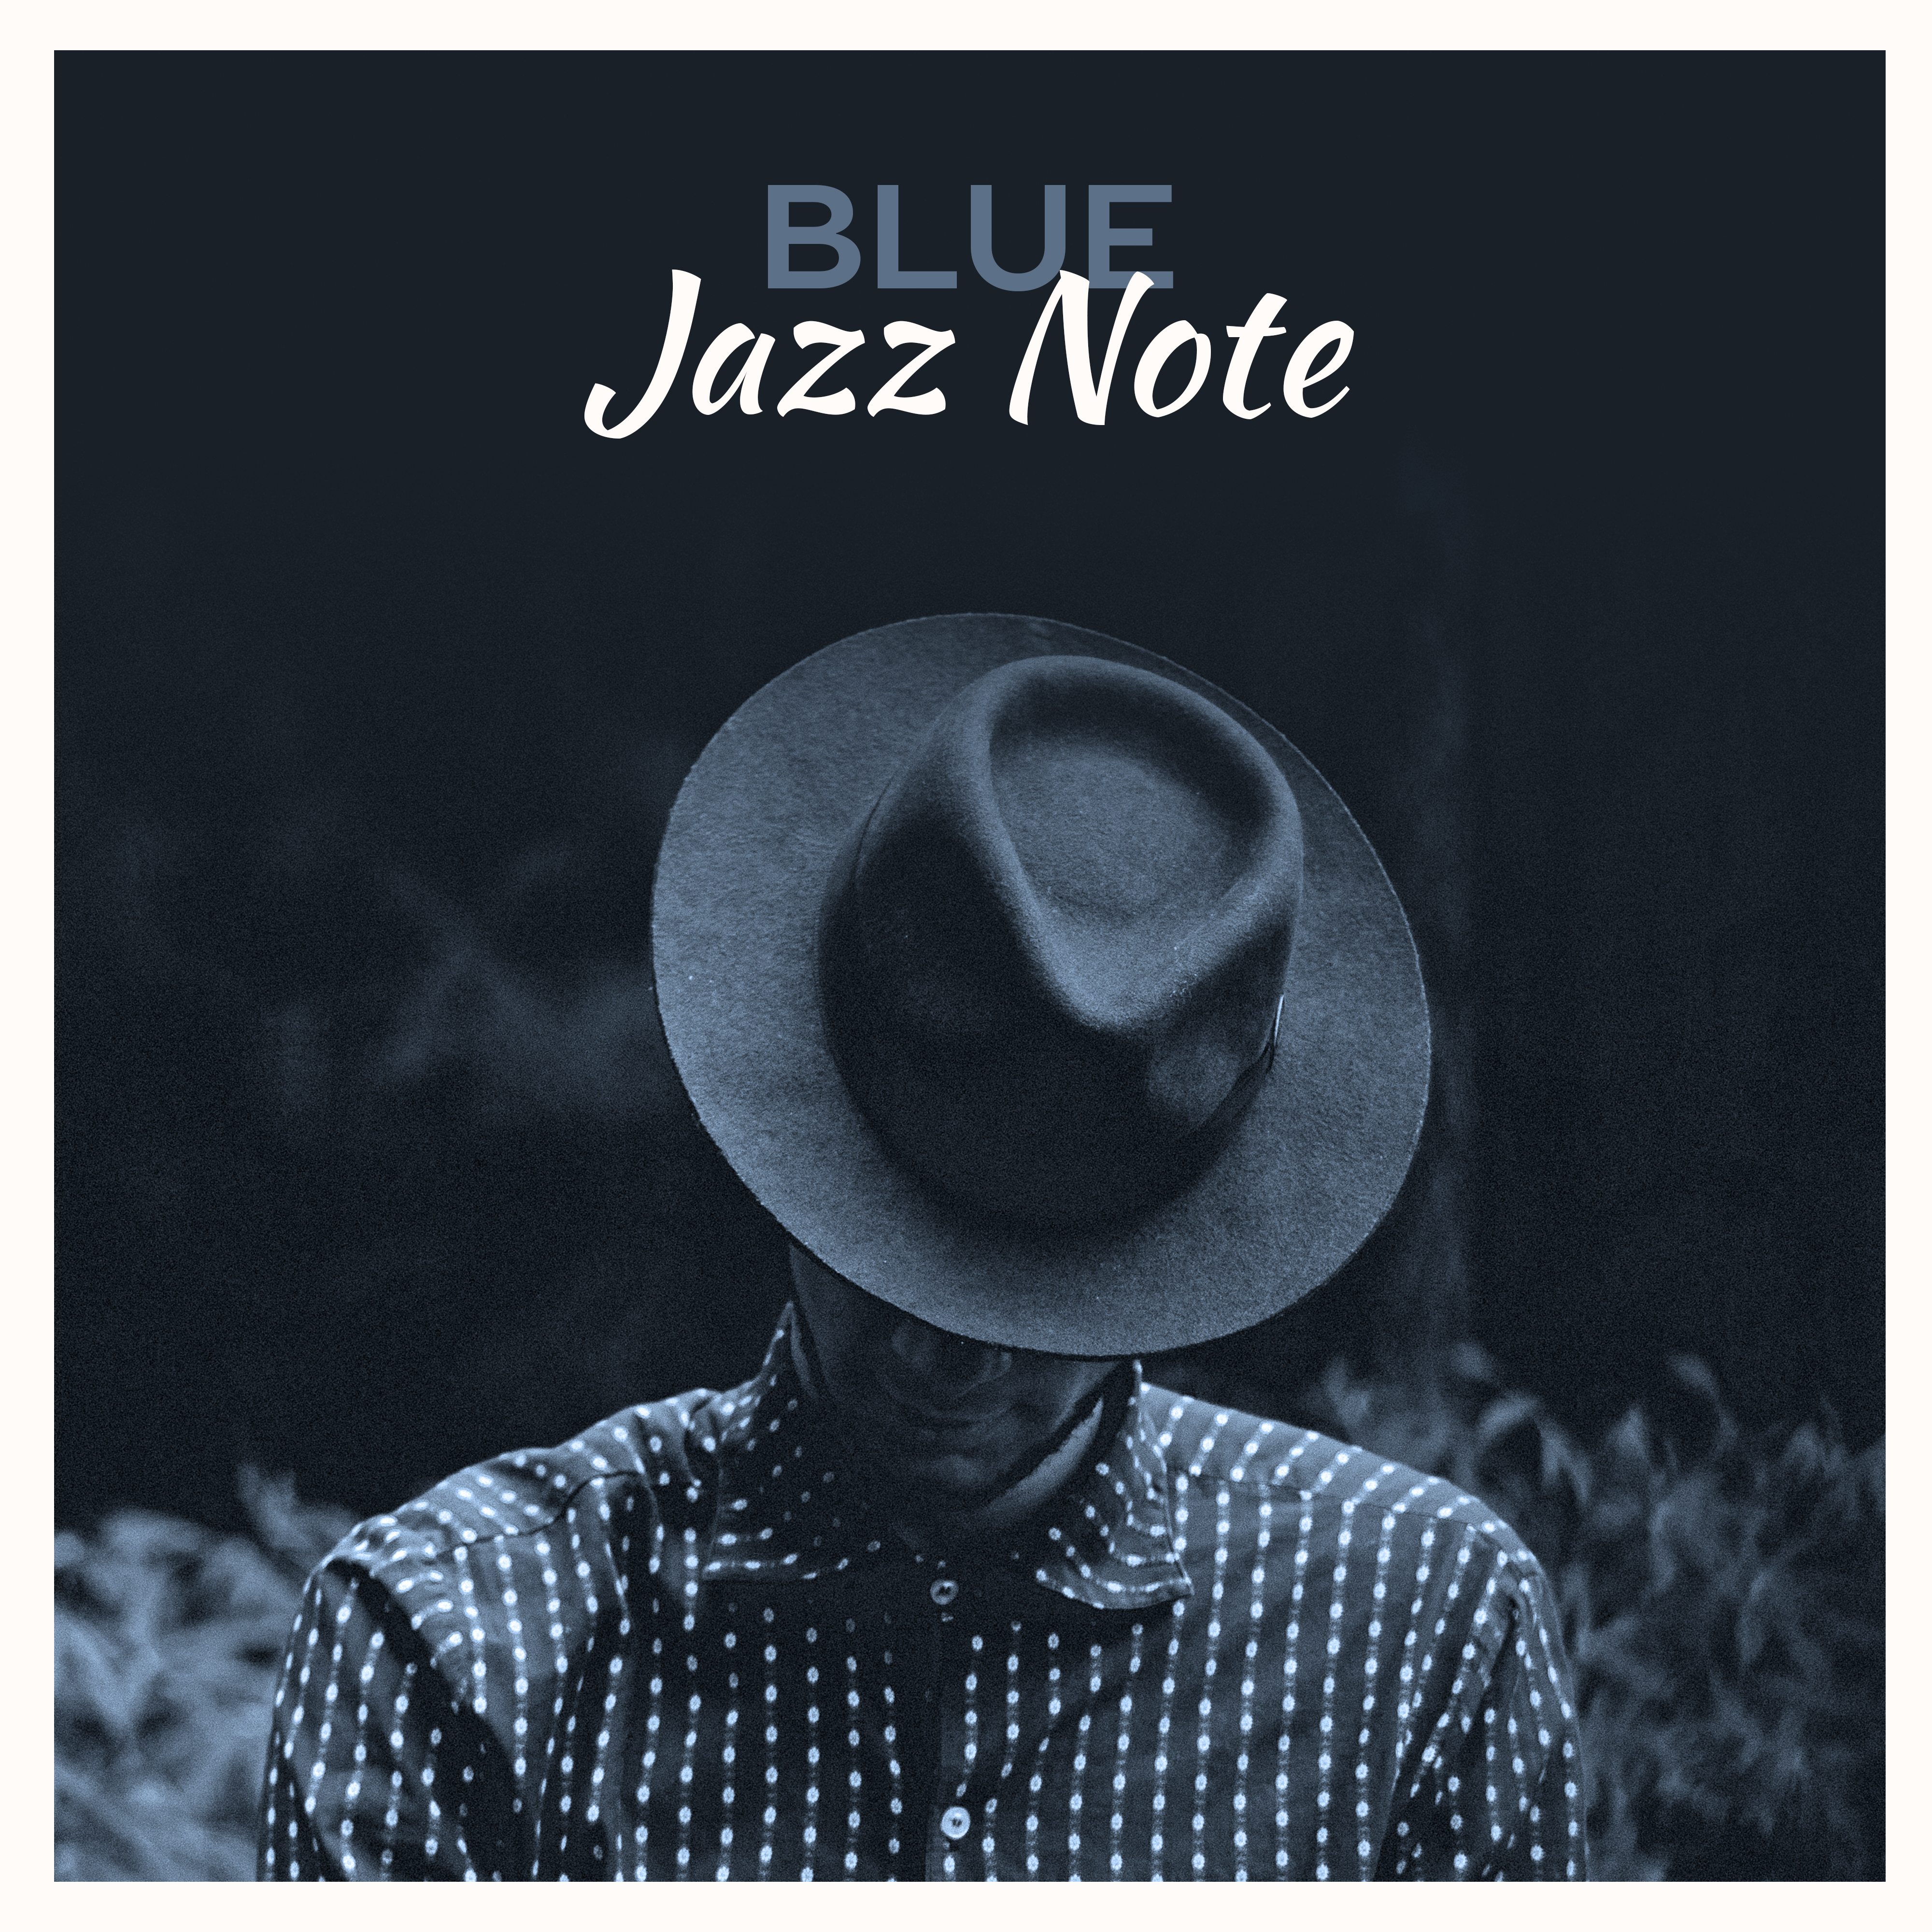 Blue Jazz Note – Chilled Jazz Session, Smooth Jazz, Instrumental Music, Ambient Lounge